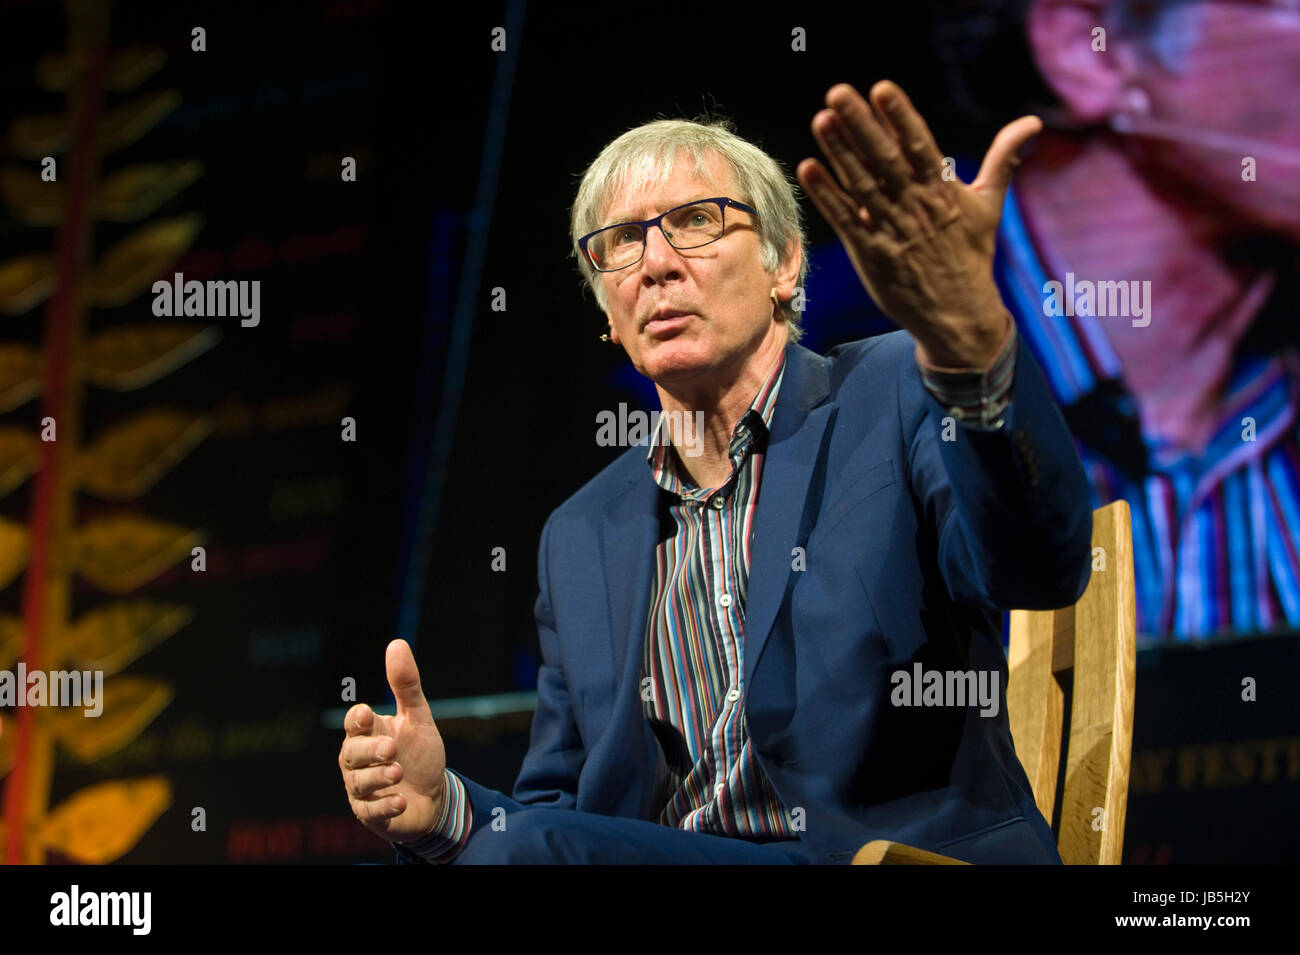 David Walker journalist speaking on stage at Hay Festival of Literature and the Arts 2017 Hay-on-Wye Powys Wales UK Stock Photo